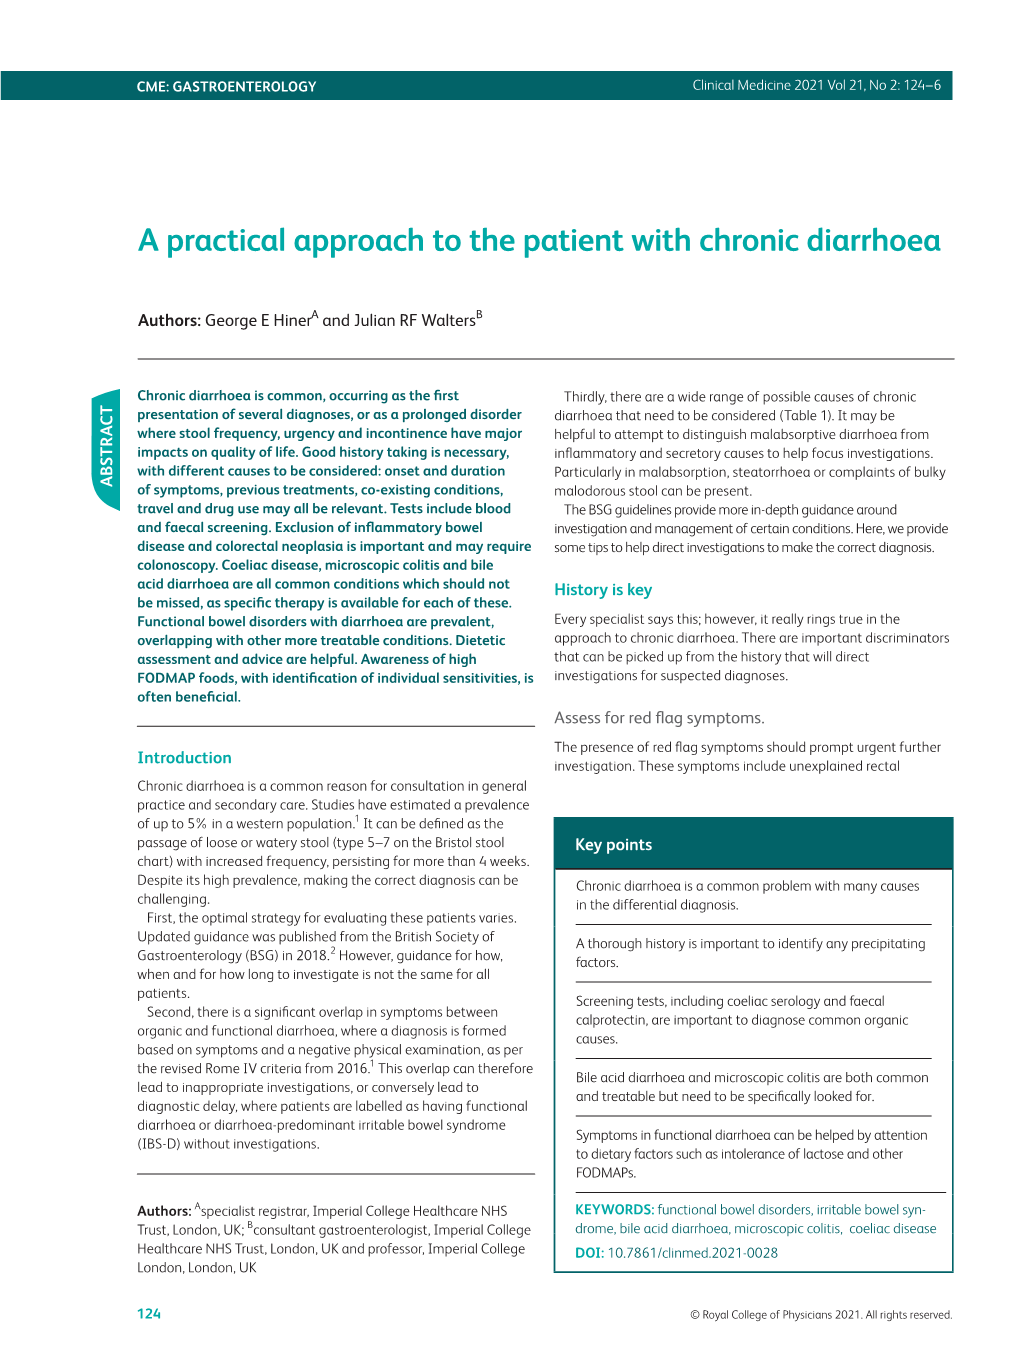 A Practical Approach to the Patient with Chronic Diarrhoea